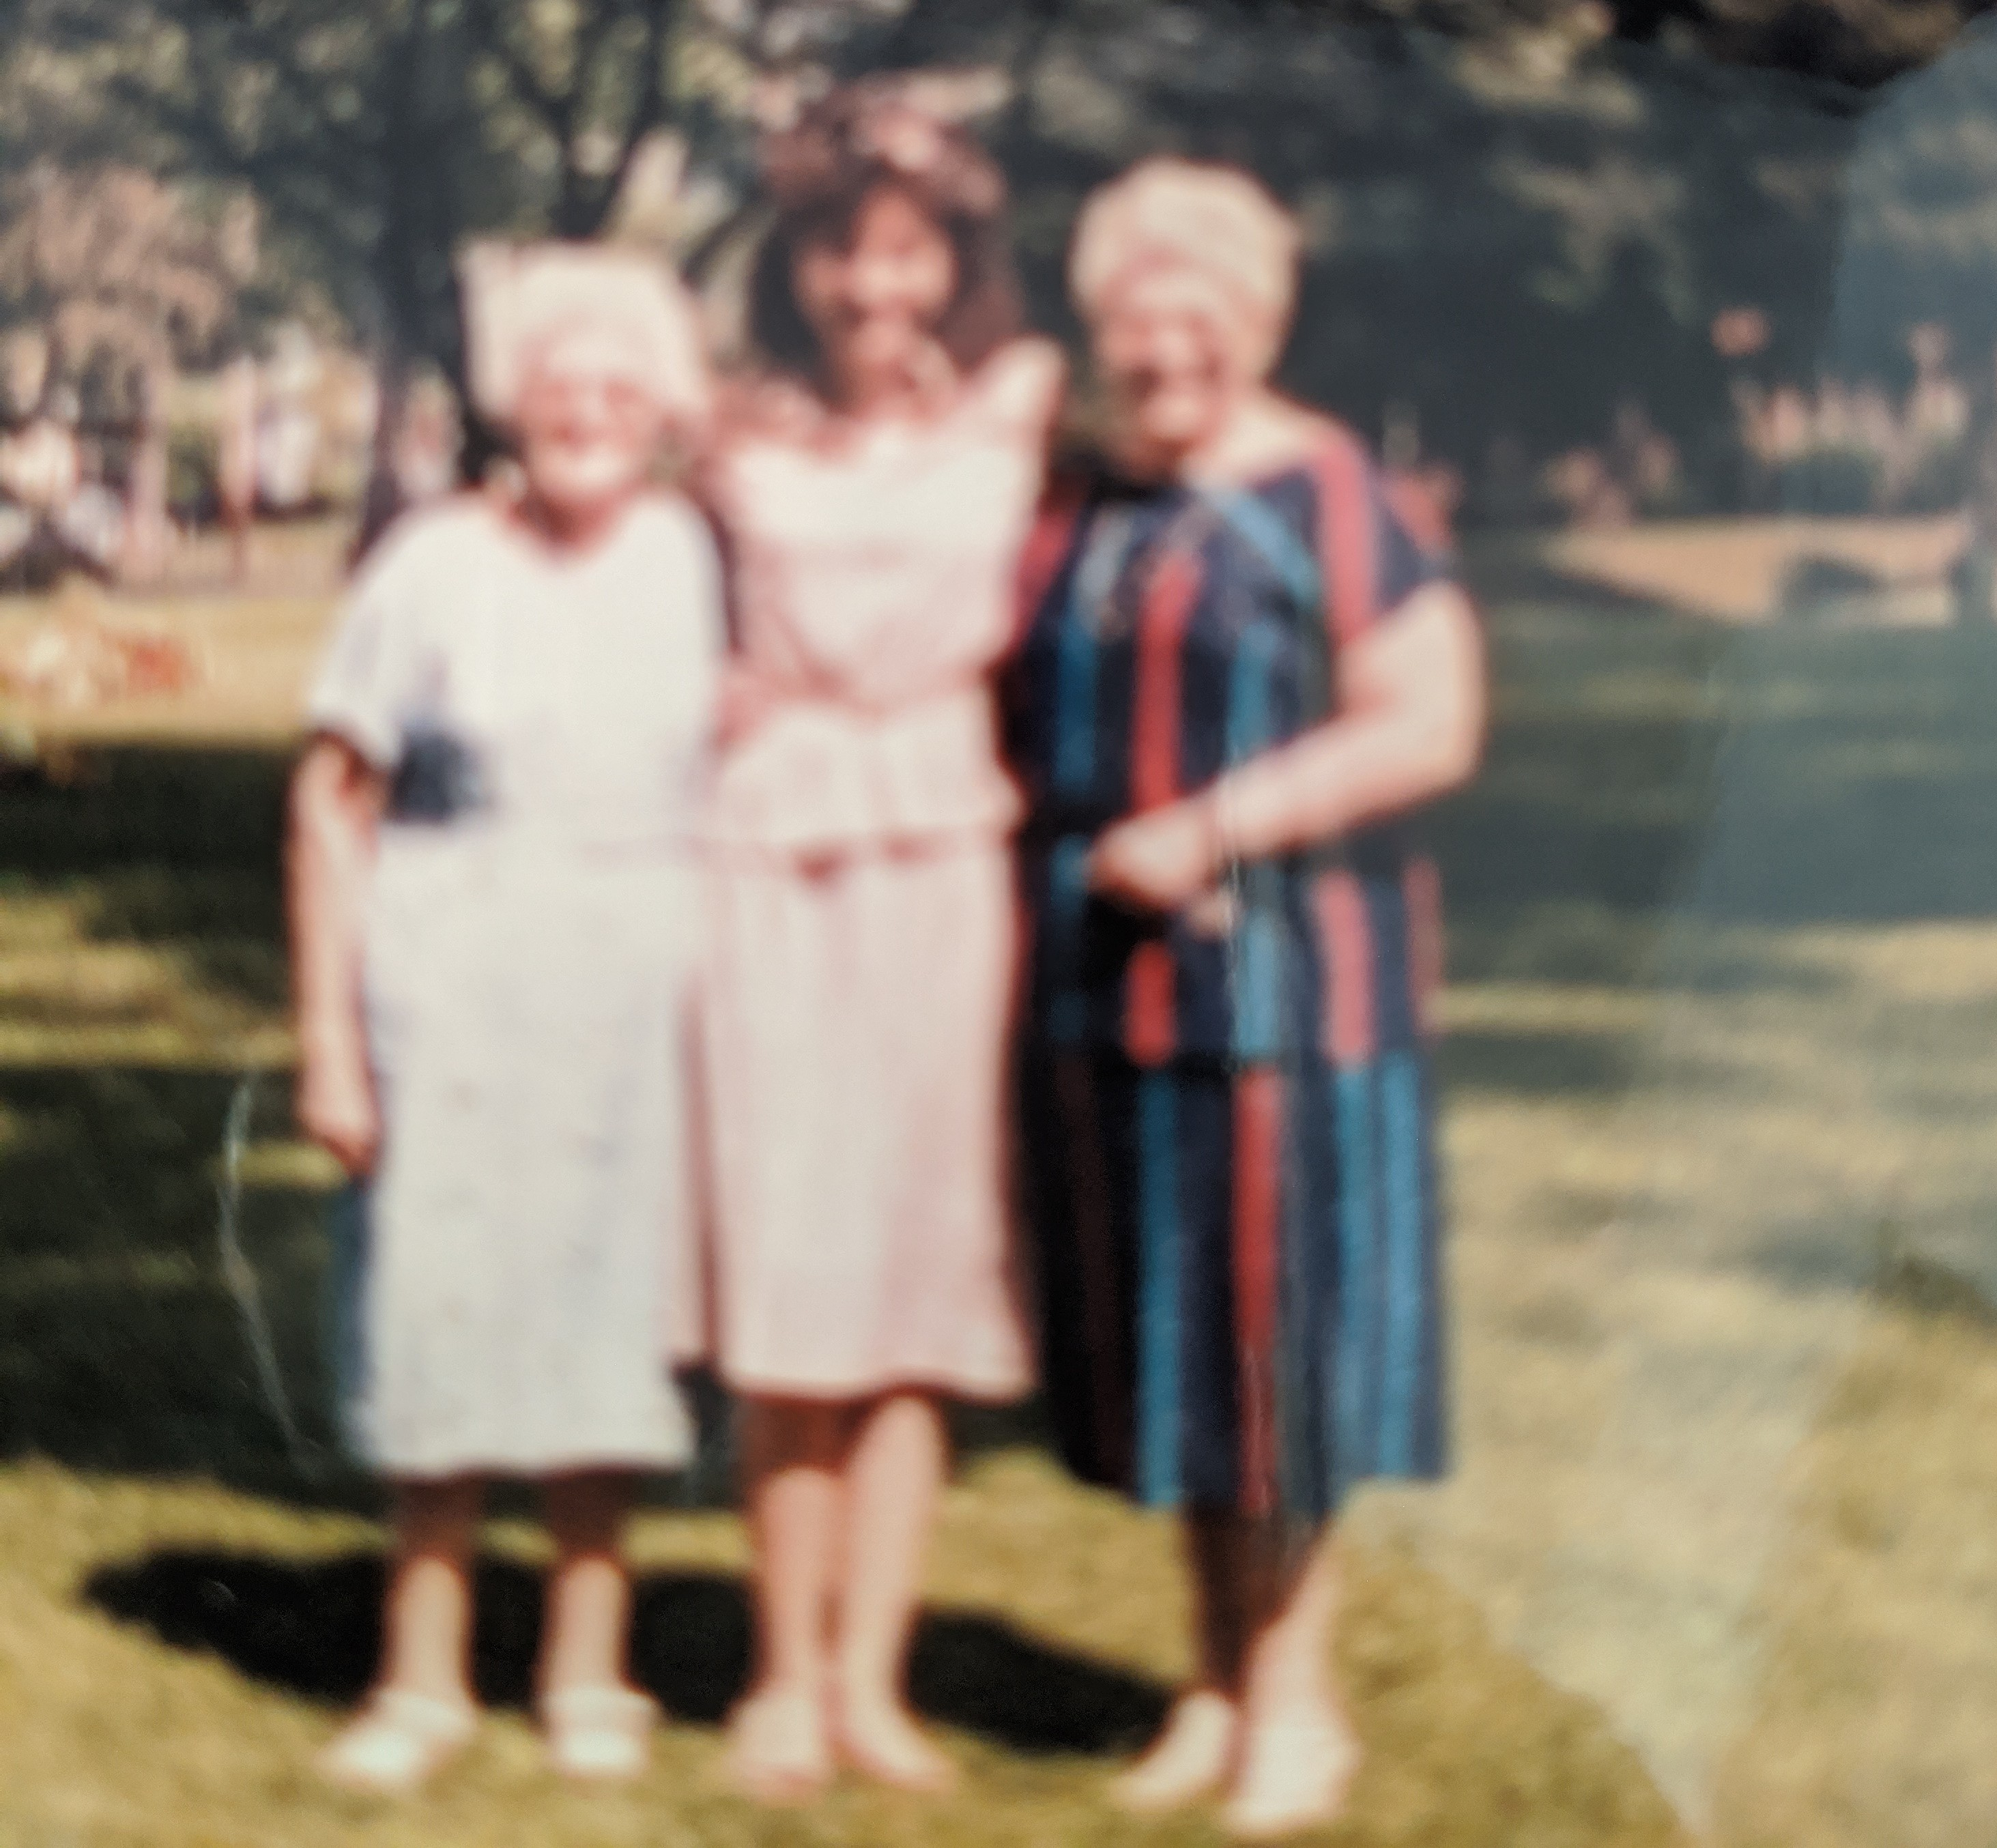 Leontina M Bernard Holly A Villella Dolores J Chiappazzi on Mother's Day in the 1980s